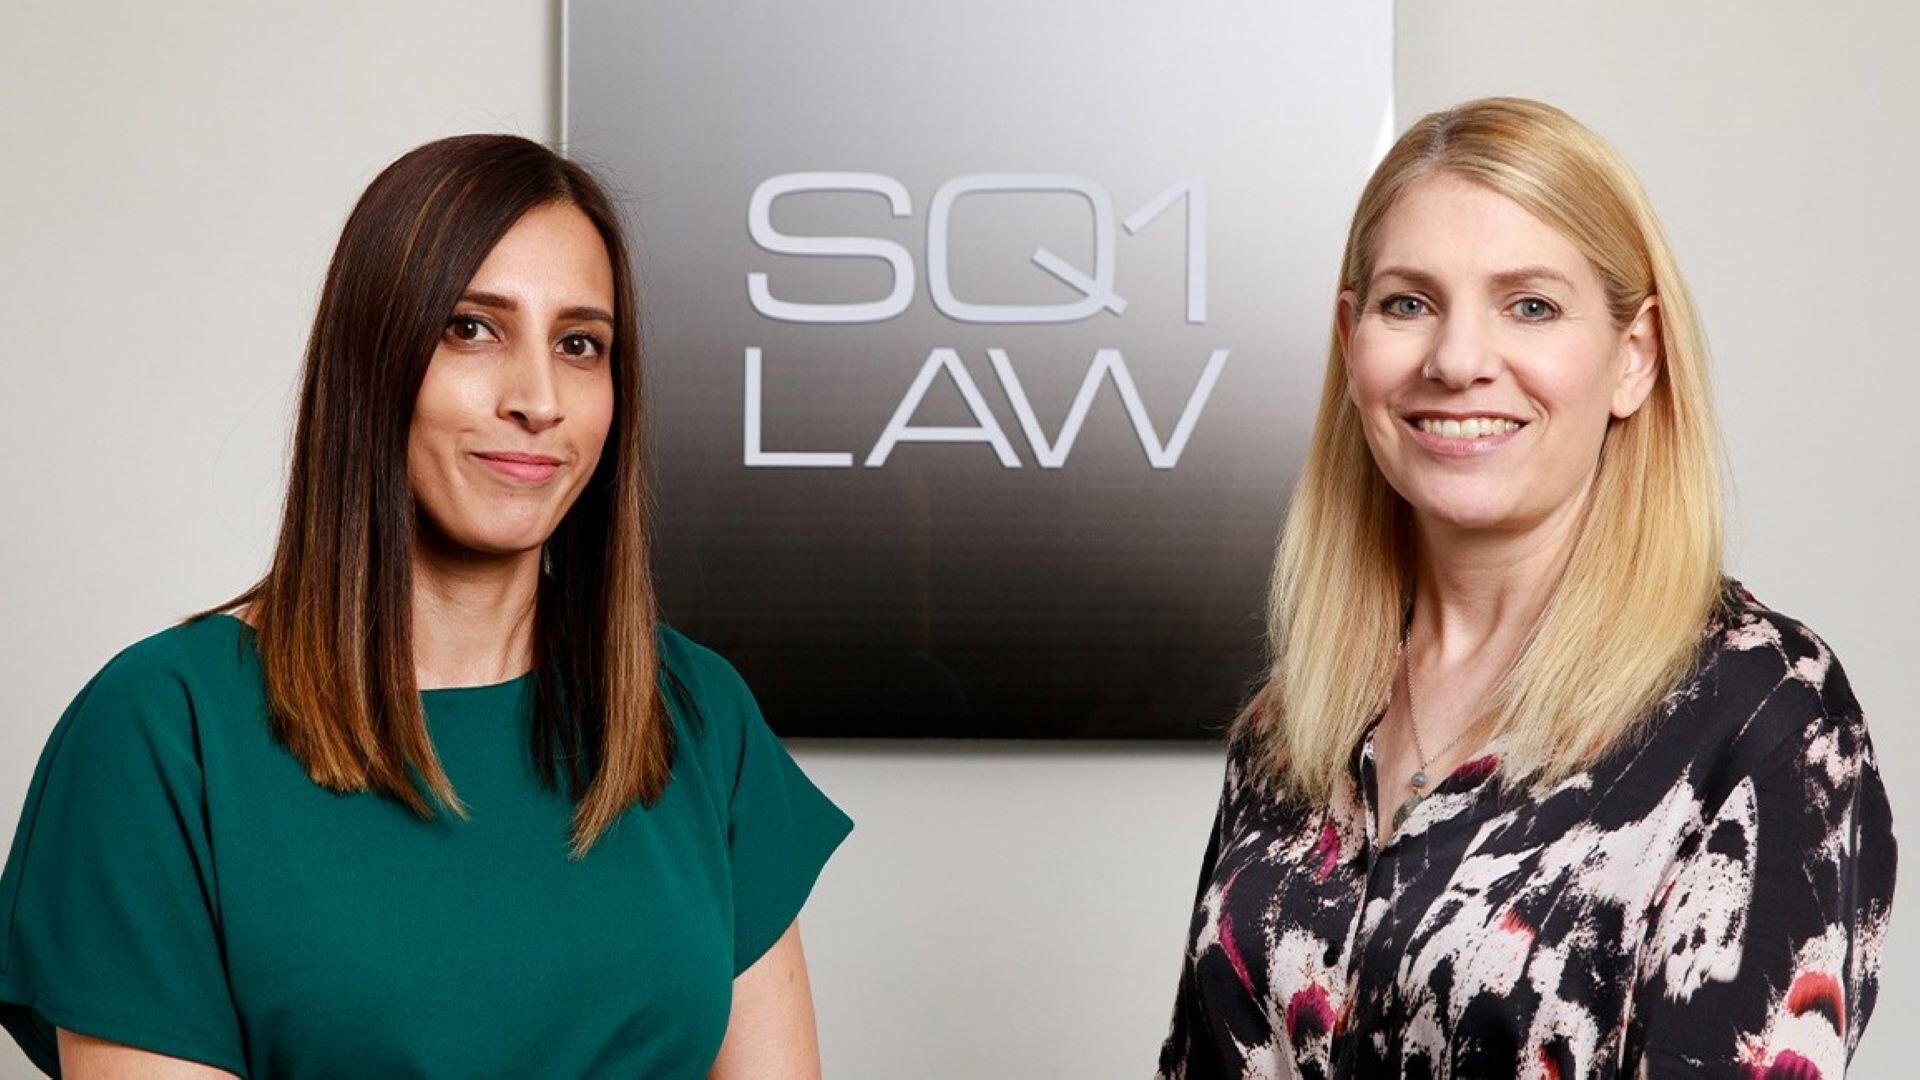 Square One Law, the North of England entrepreneurial law firm, has announced the promotion of Bal Manak to Construction Partner.